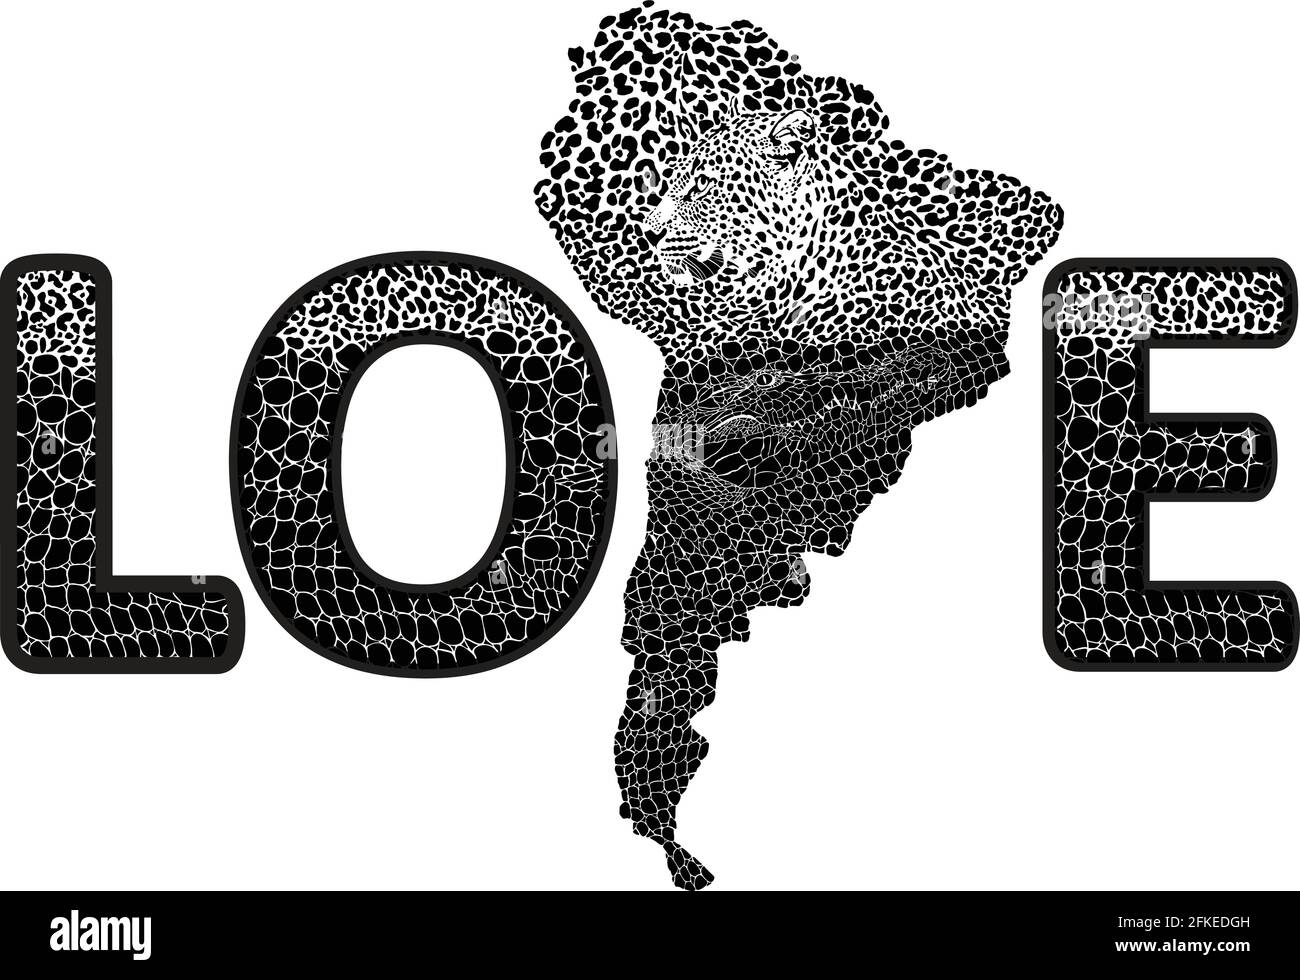 Love South America of map background with jaguar and crocodile Stock Vector